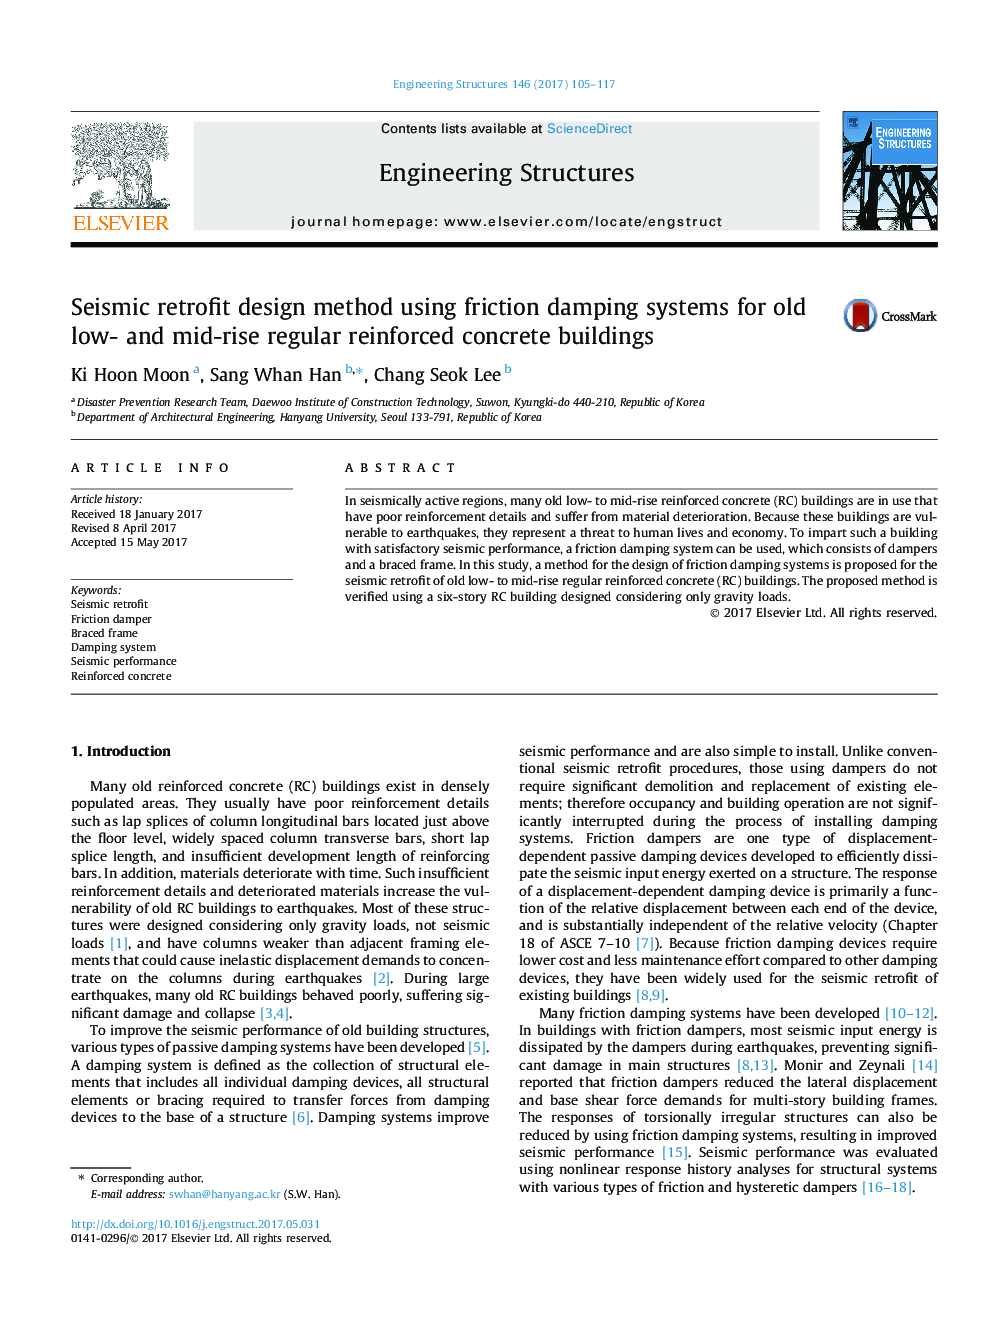 Seismic retrofit design method using friction damping systems for old low- and mid-rise regular reinforced concrete buildings